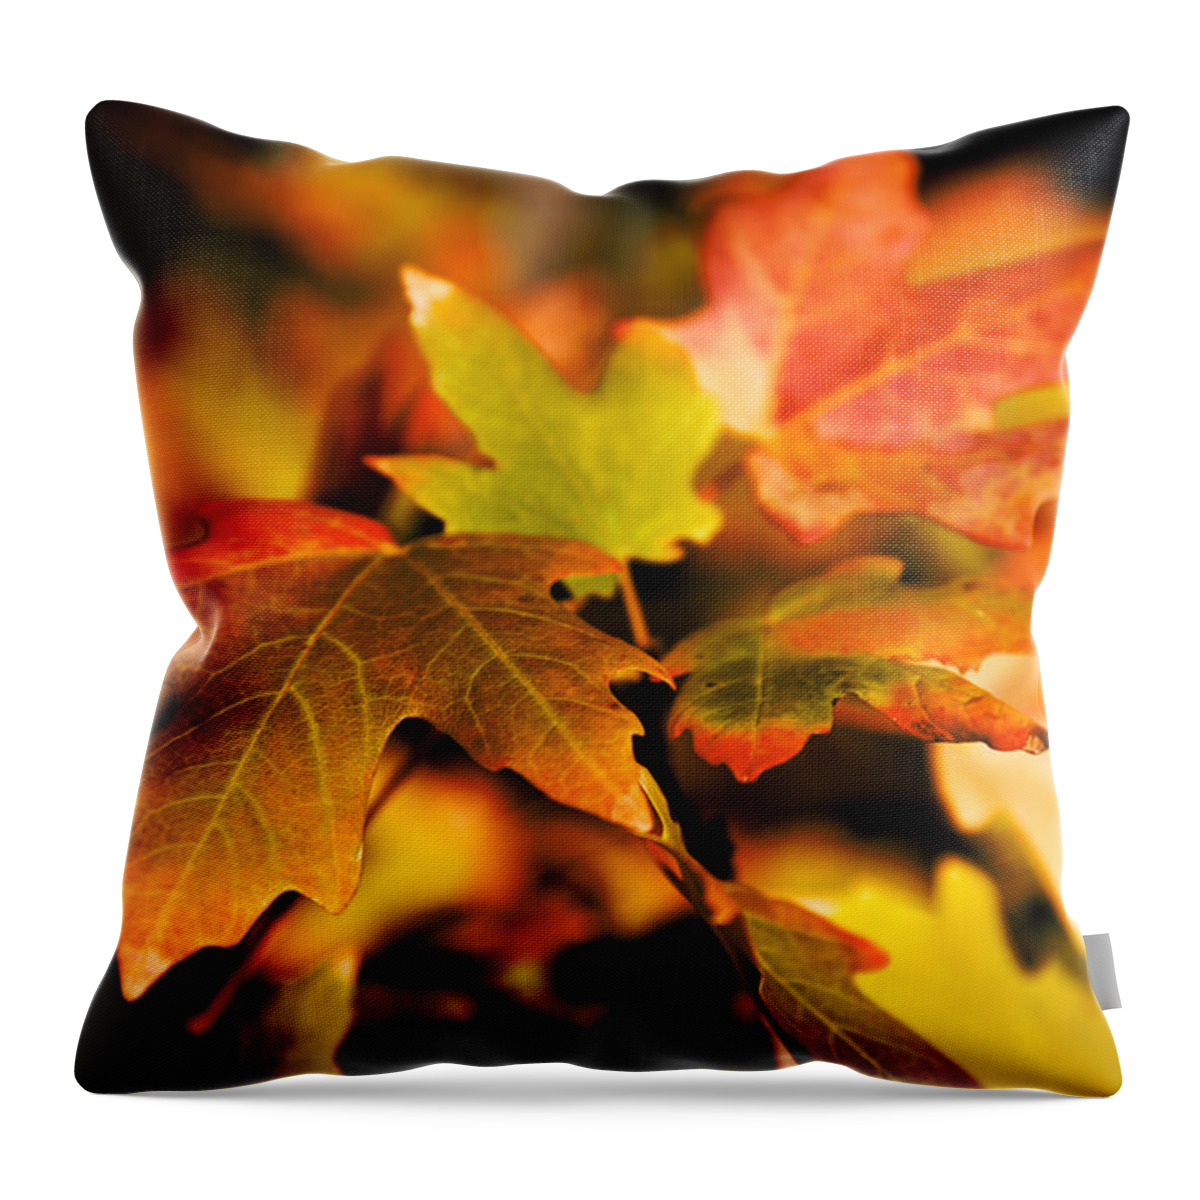 Red Throw Pillow featuring the photograph Reds by Chad Dutson